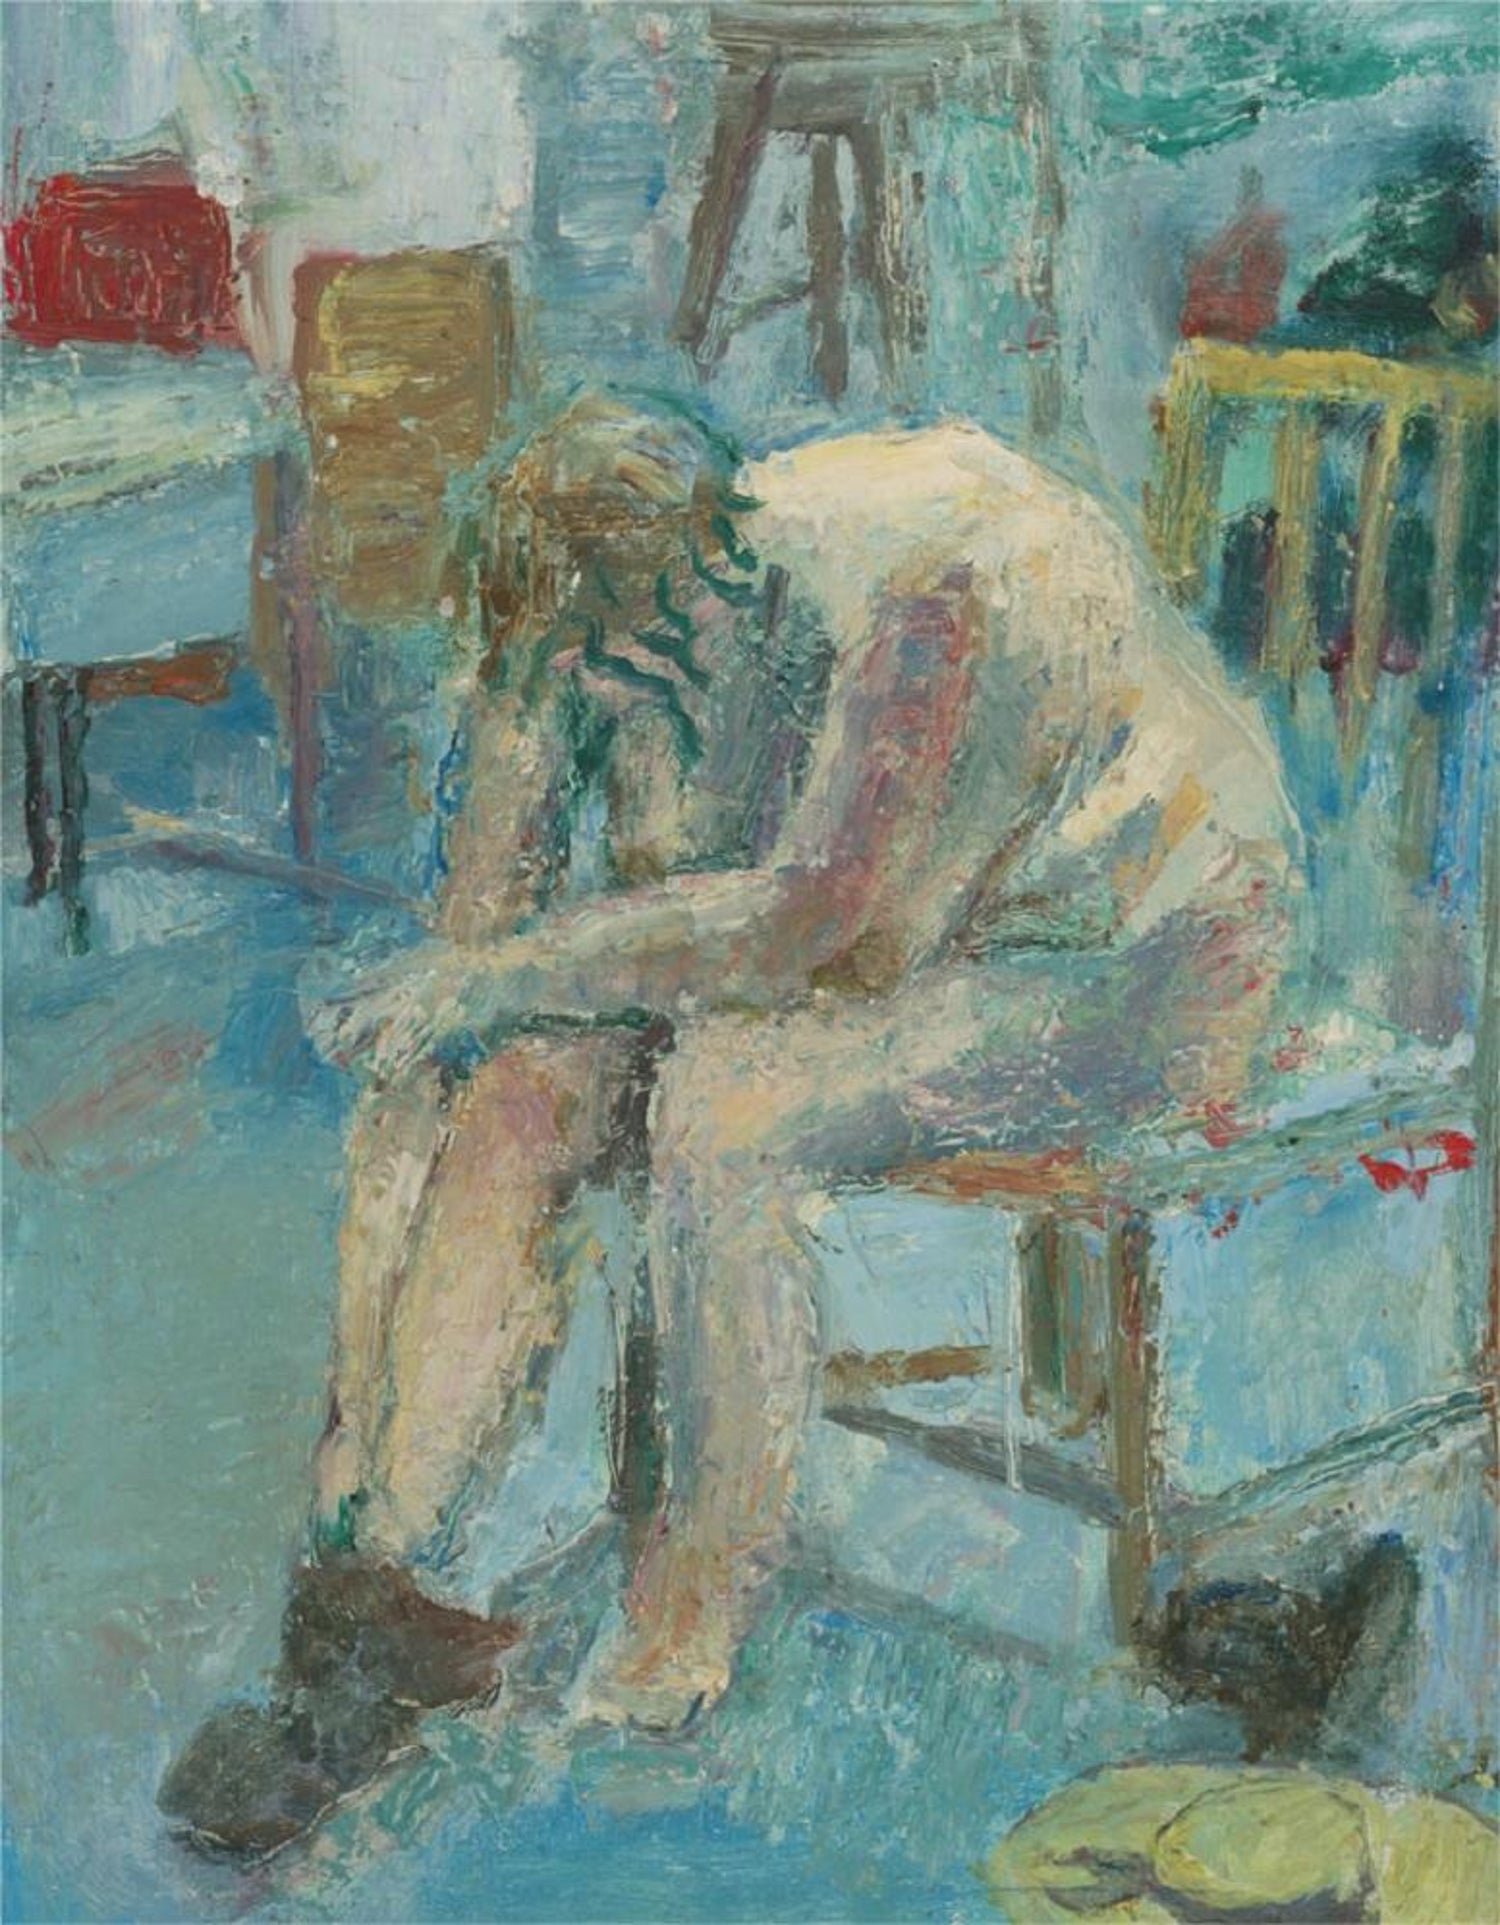 Edward Lewis - Edward Lewis (1936-2018) - Contemporary Oil, Nude in Shoes  For Sale at 1stDibs